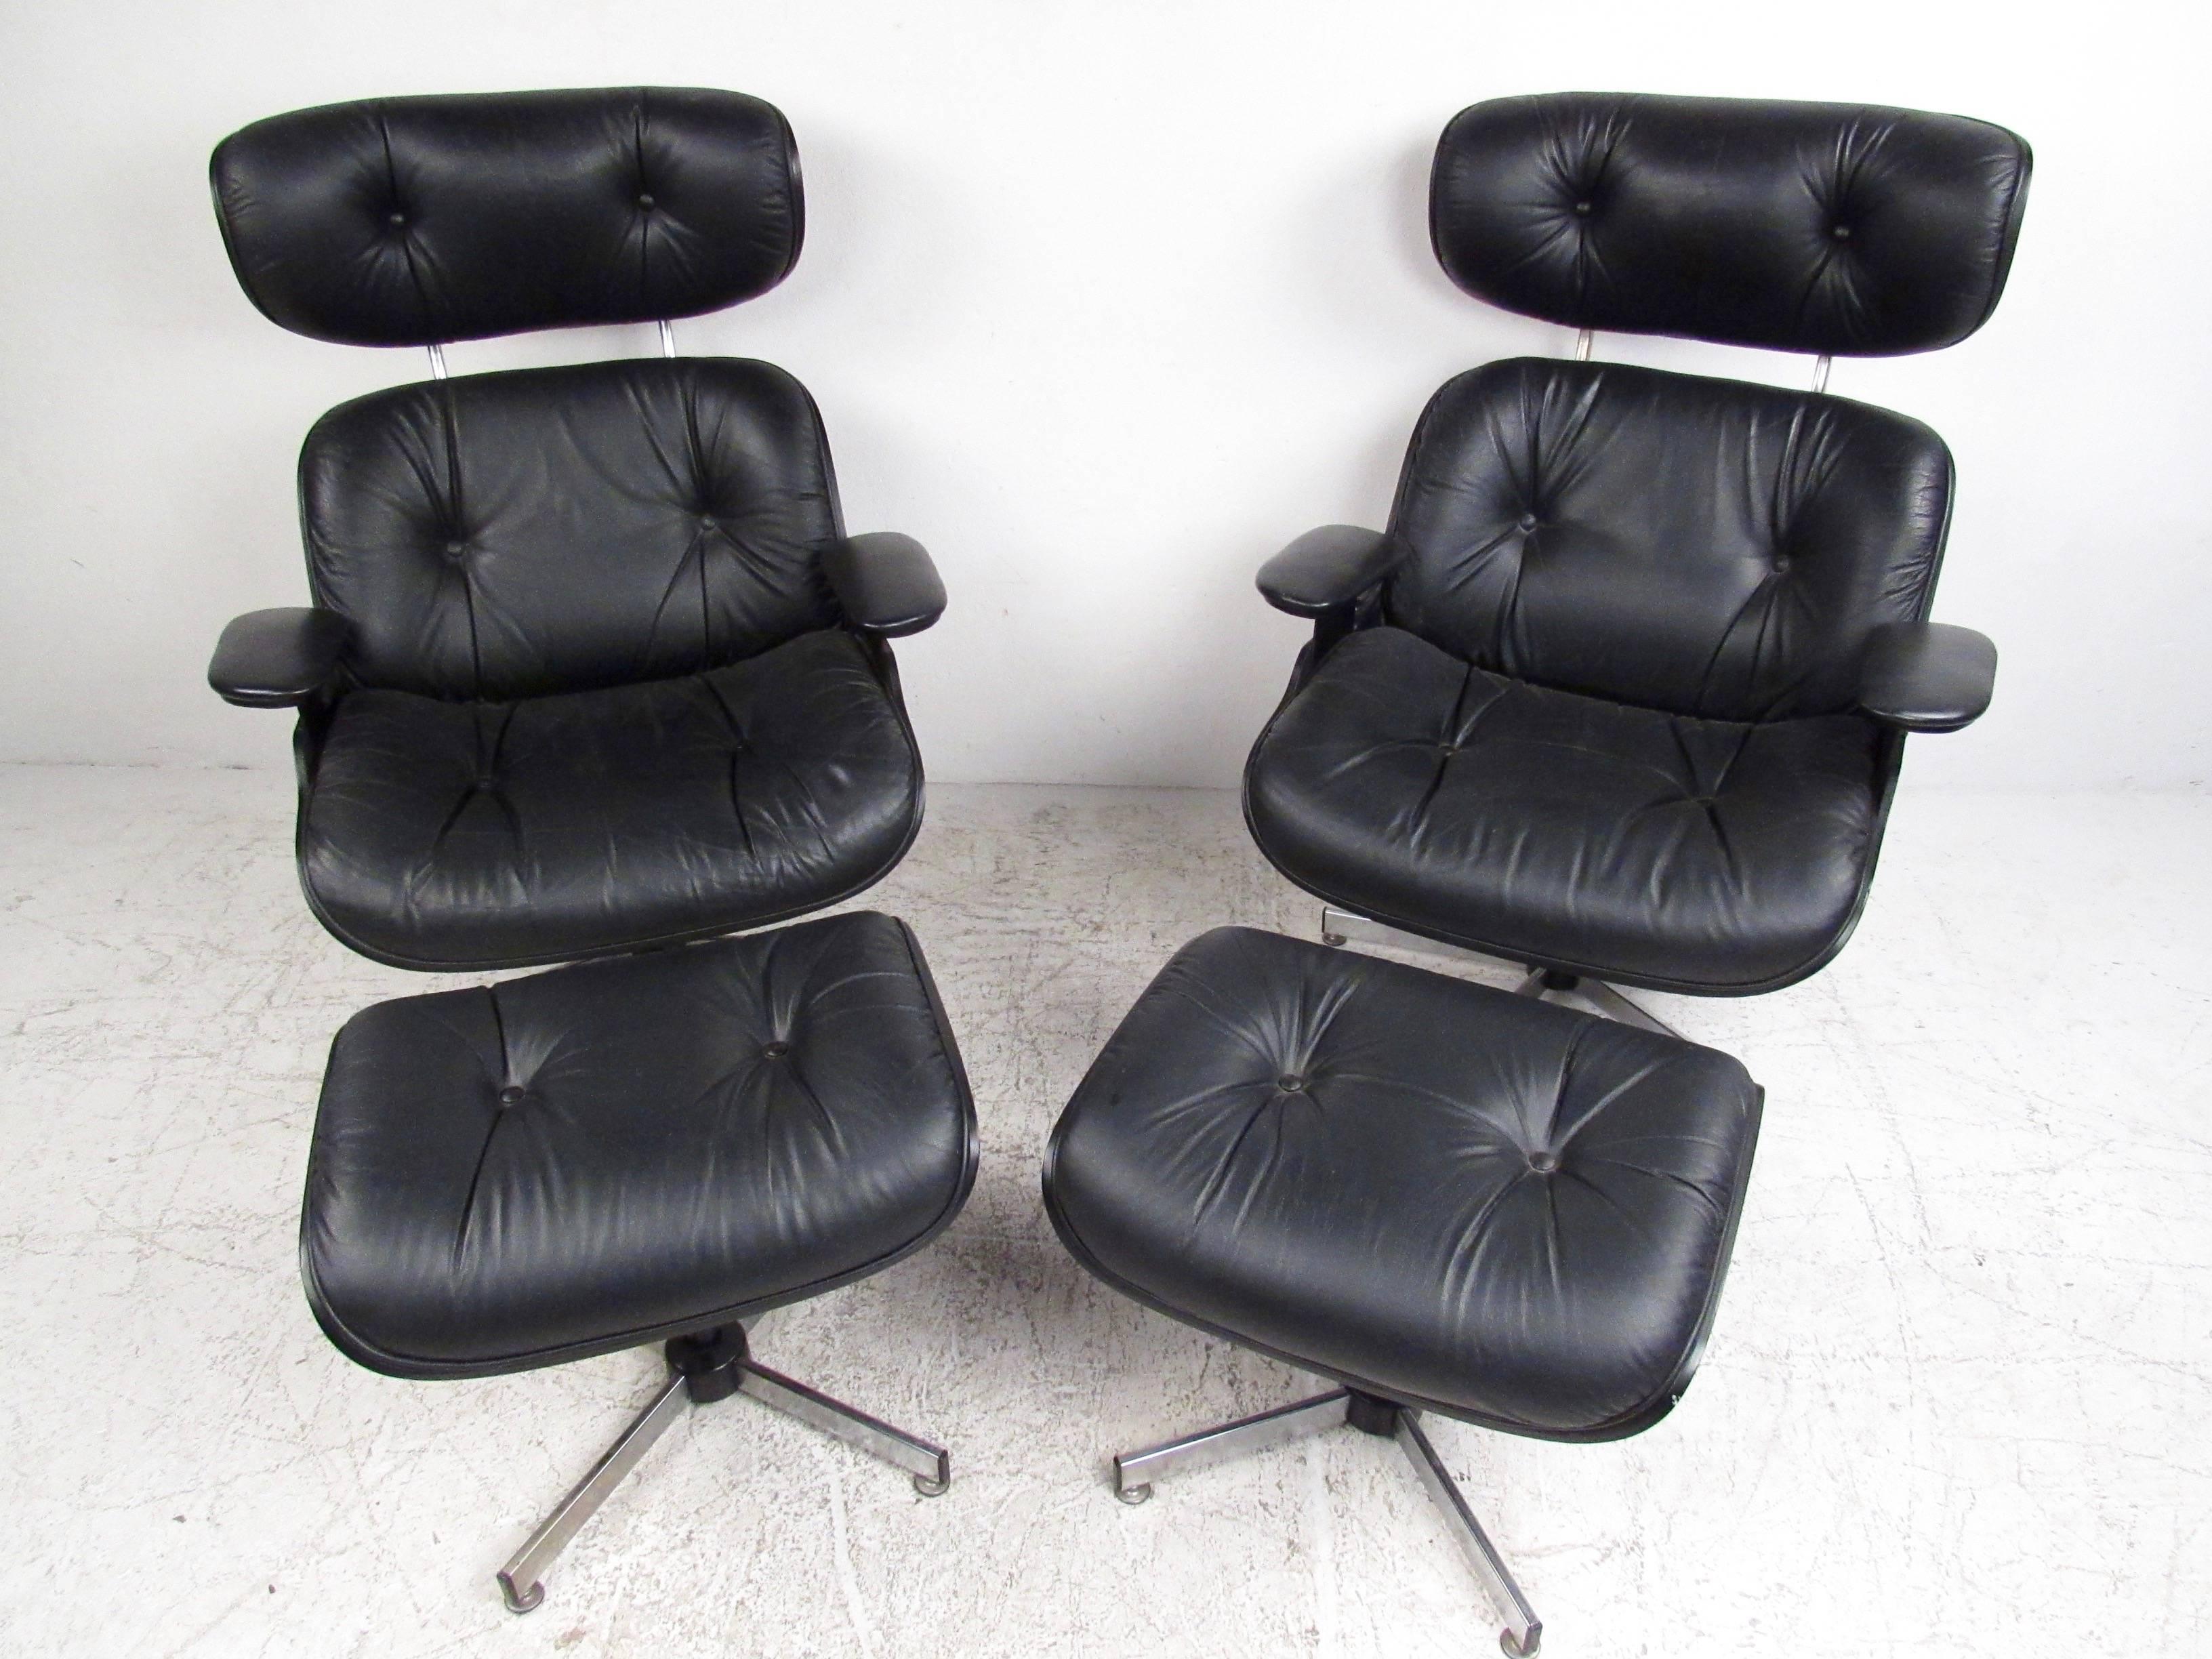 North American Pair of Mid-Century Modern Eames Style Lounge Chairs by Plycraft